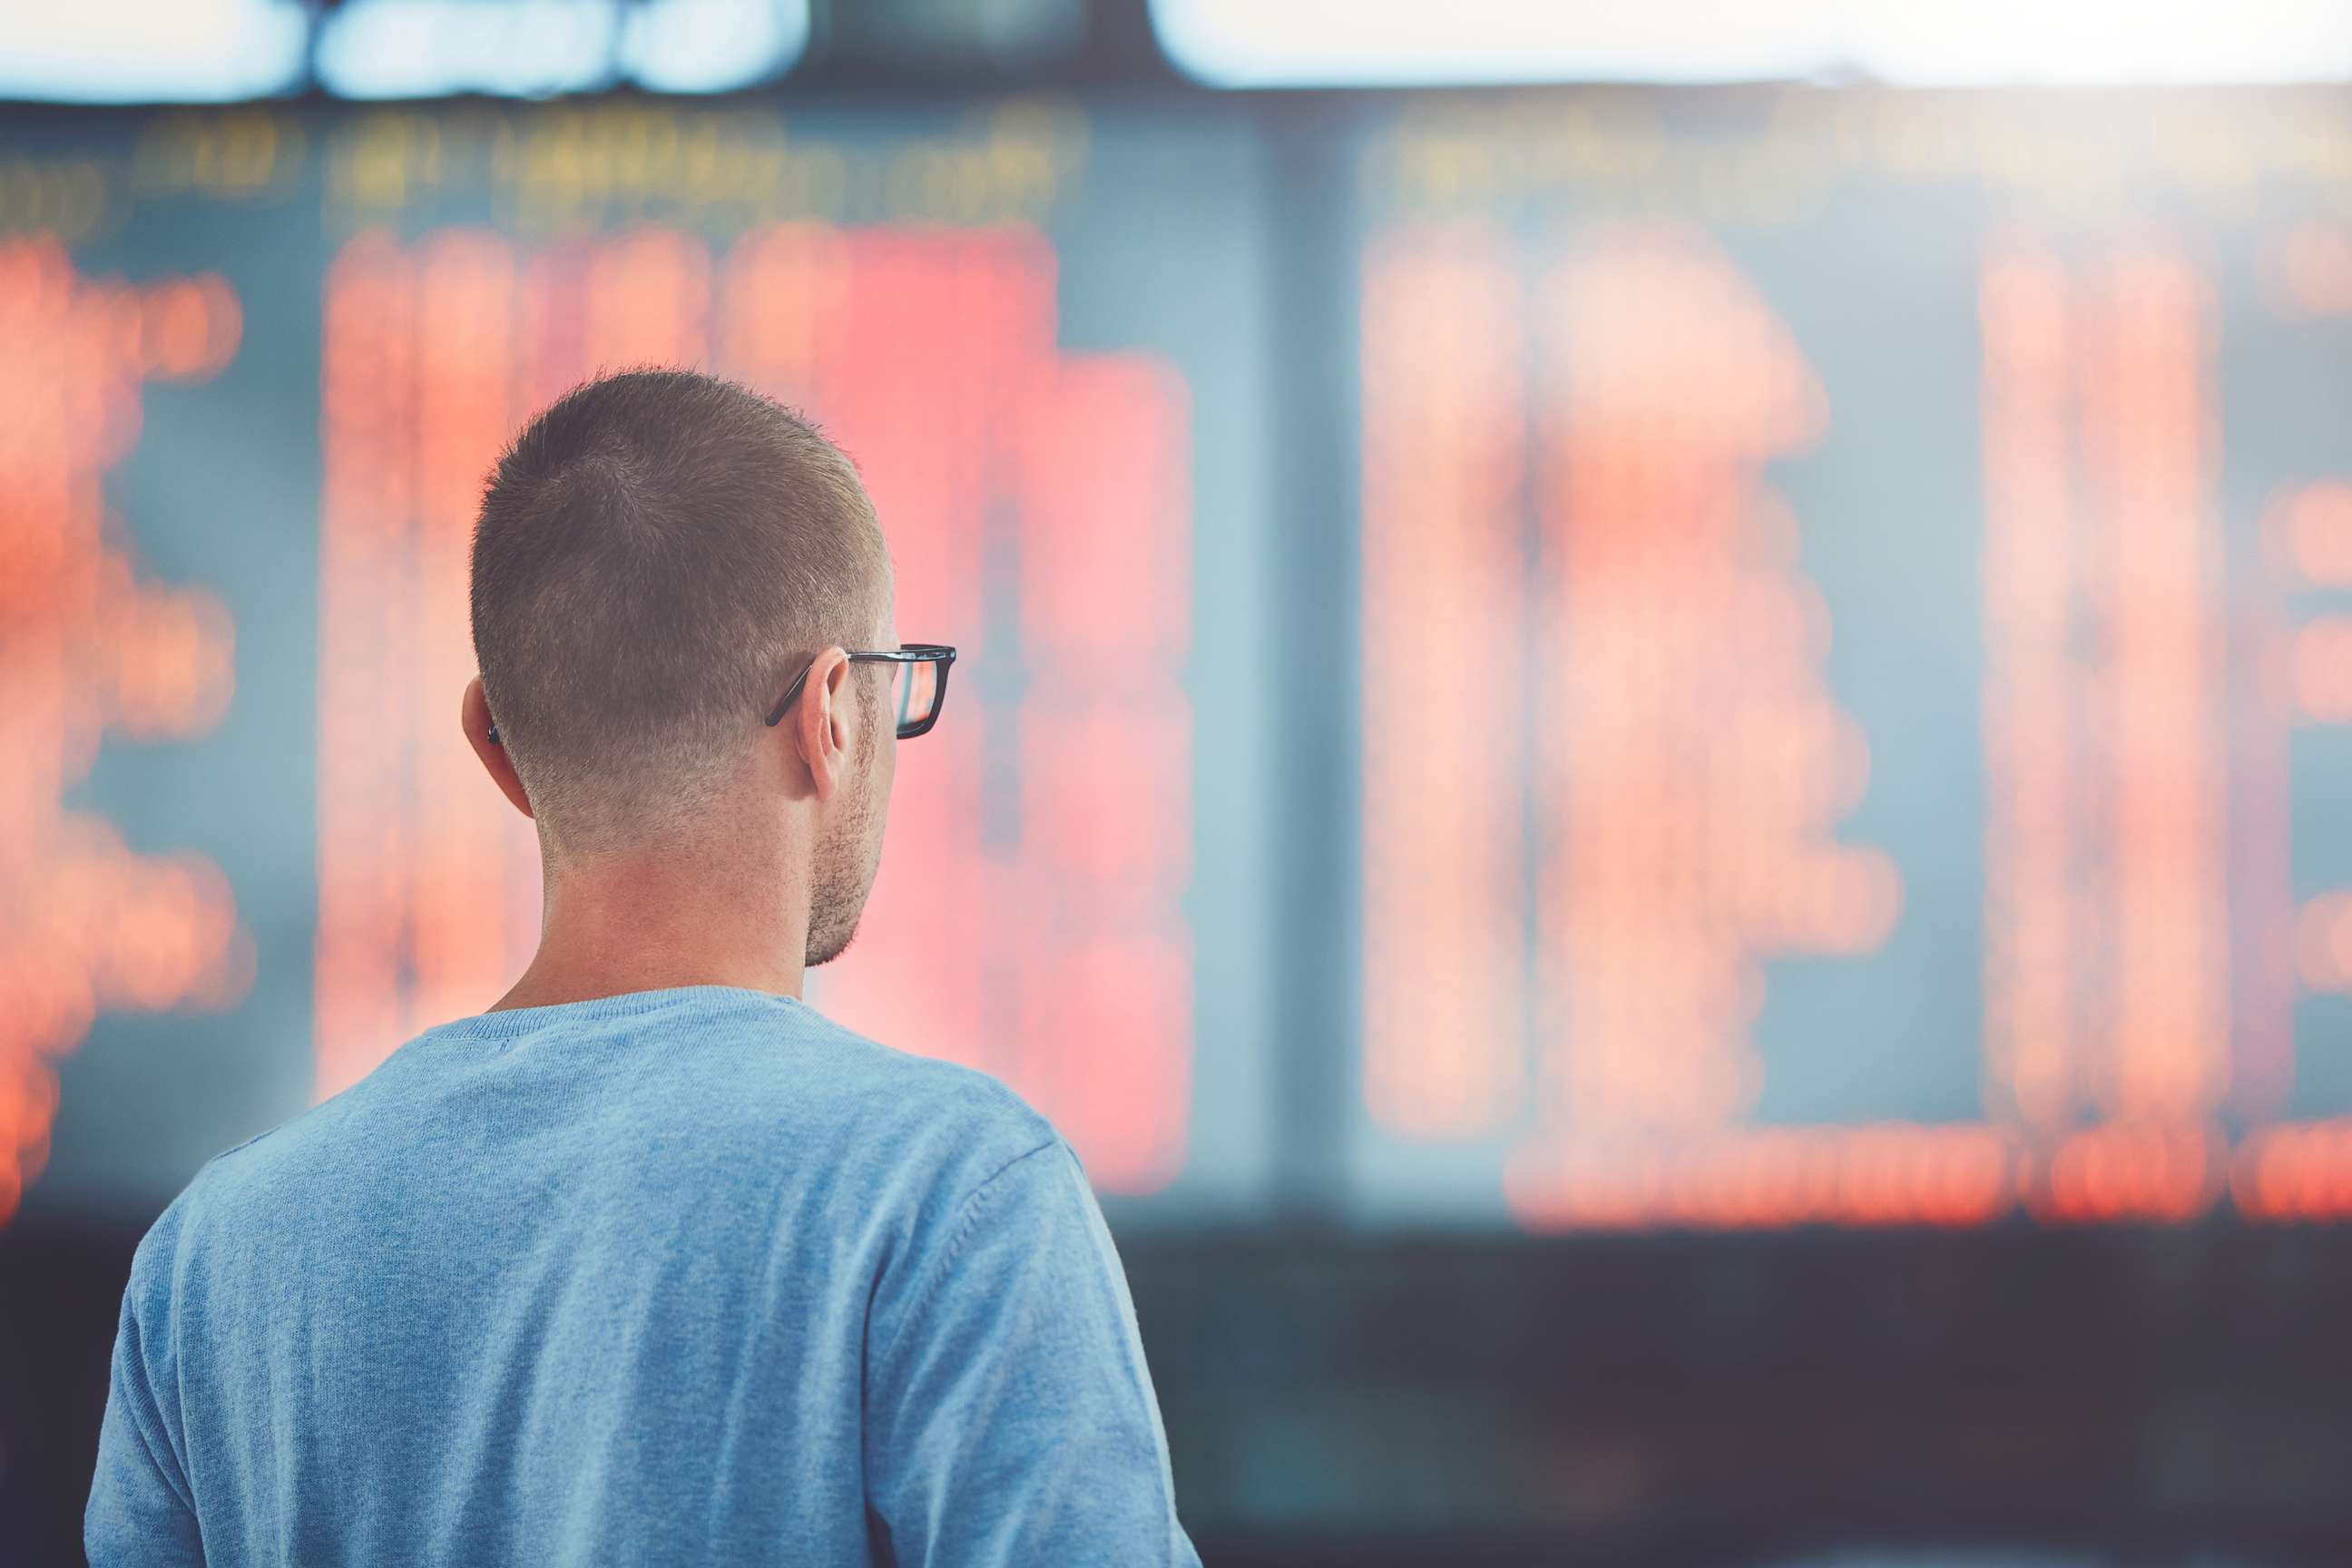 PHOTO: A young traveler watches information about his flight on the departure board at the airport in this undated stock photo.